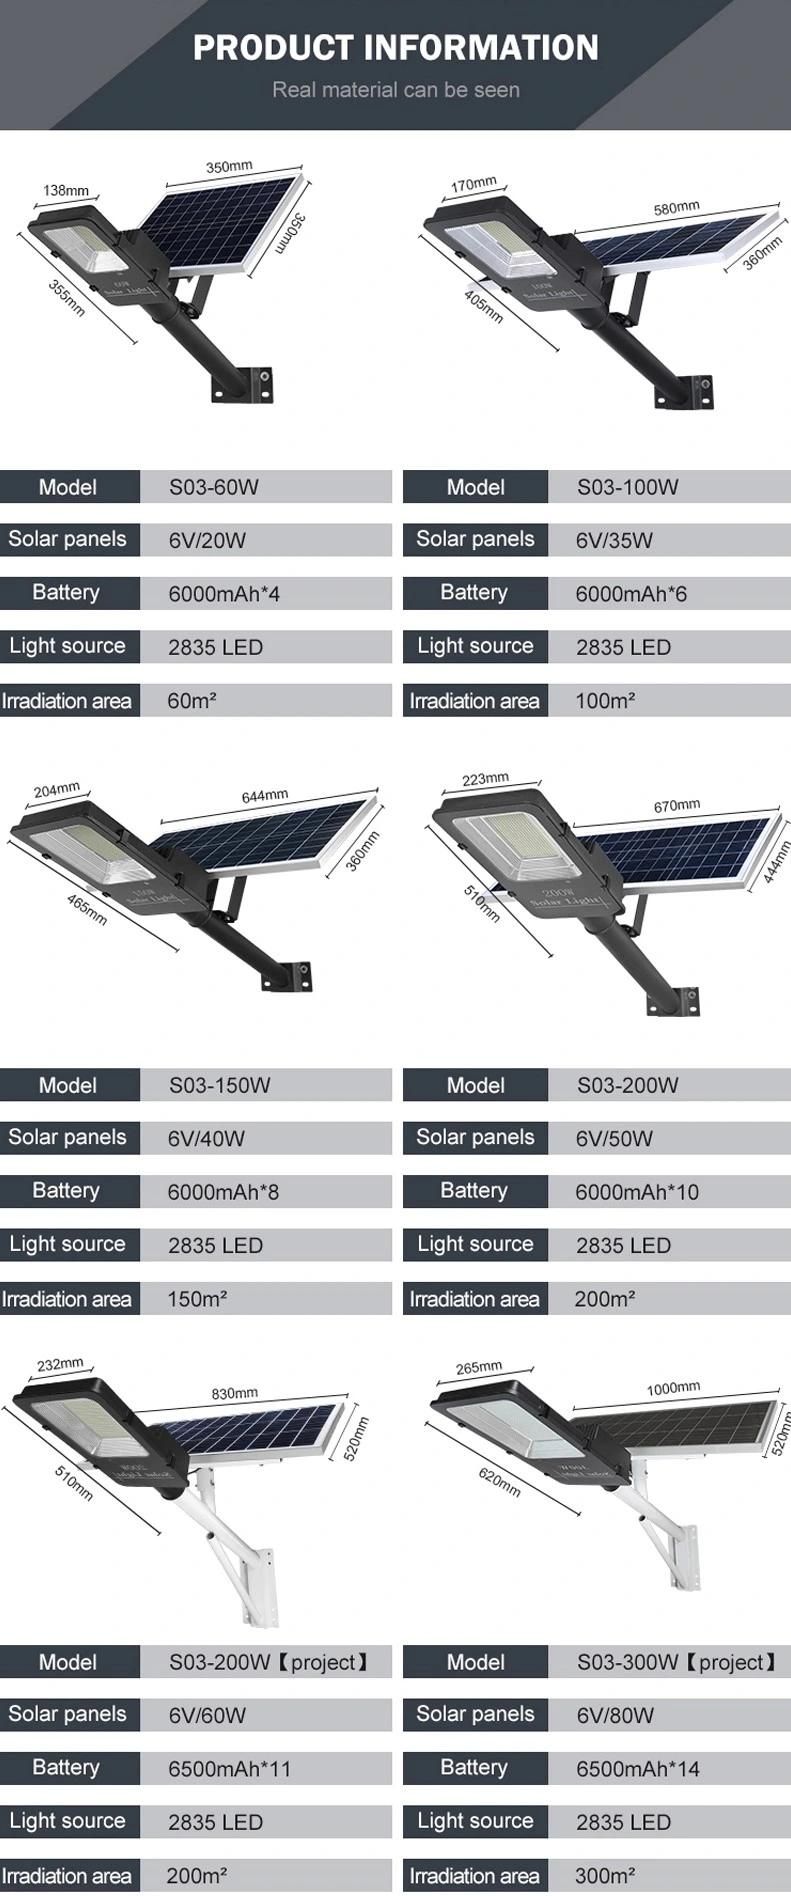 200W 300W Separated Solar and LED All in 2 Street Lights, Common Road Lamps, Good Quality Outdoor Lighting